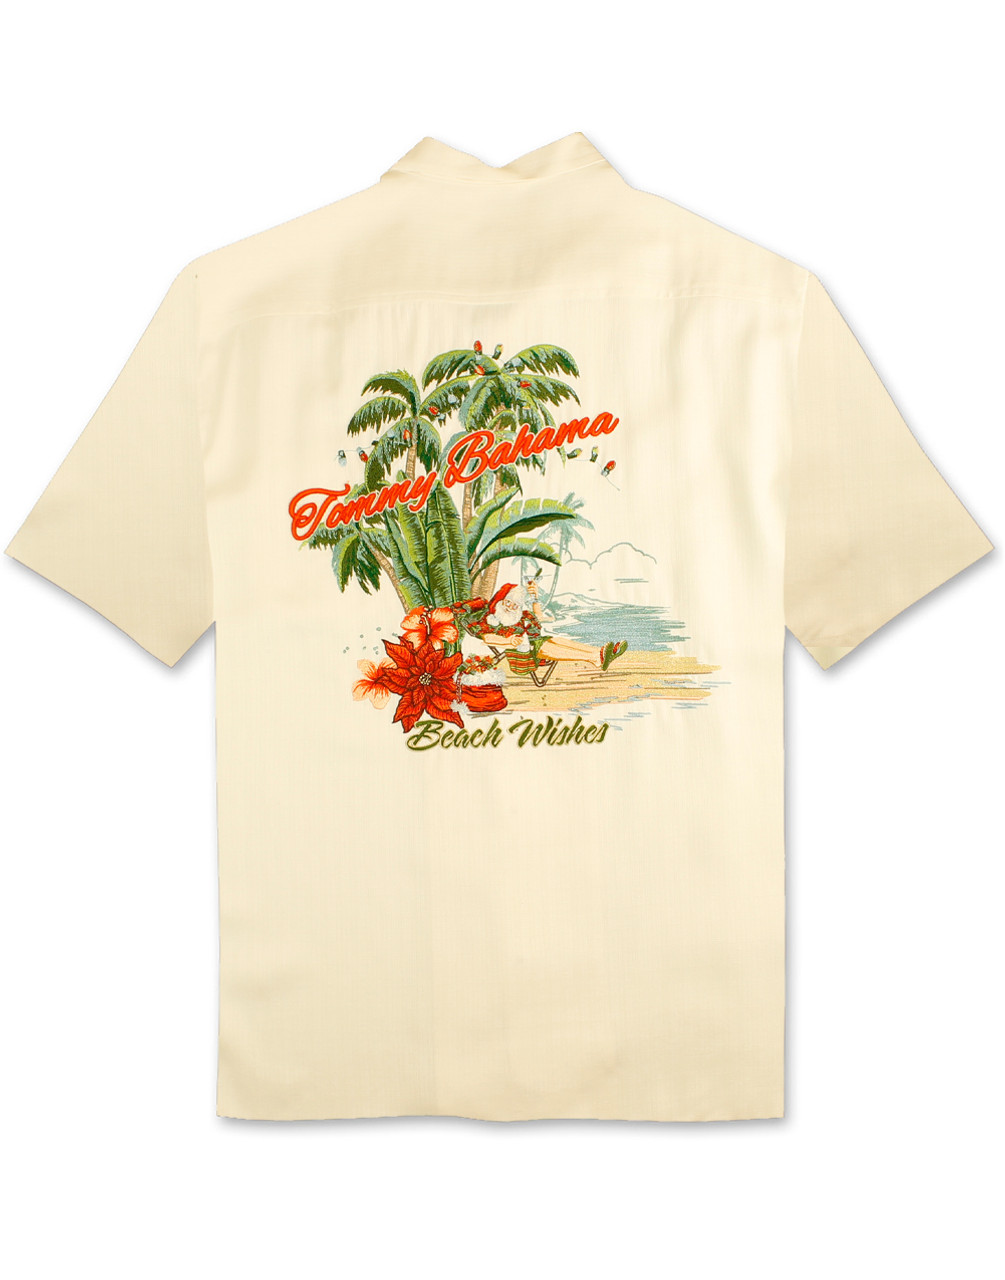 Beach Wishes Christmas Shirt by Tommy Bahama - Captains Landing